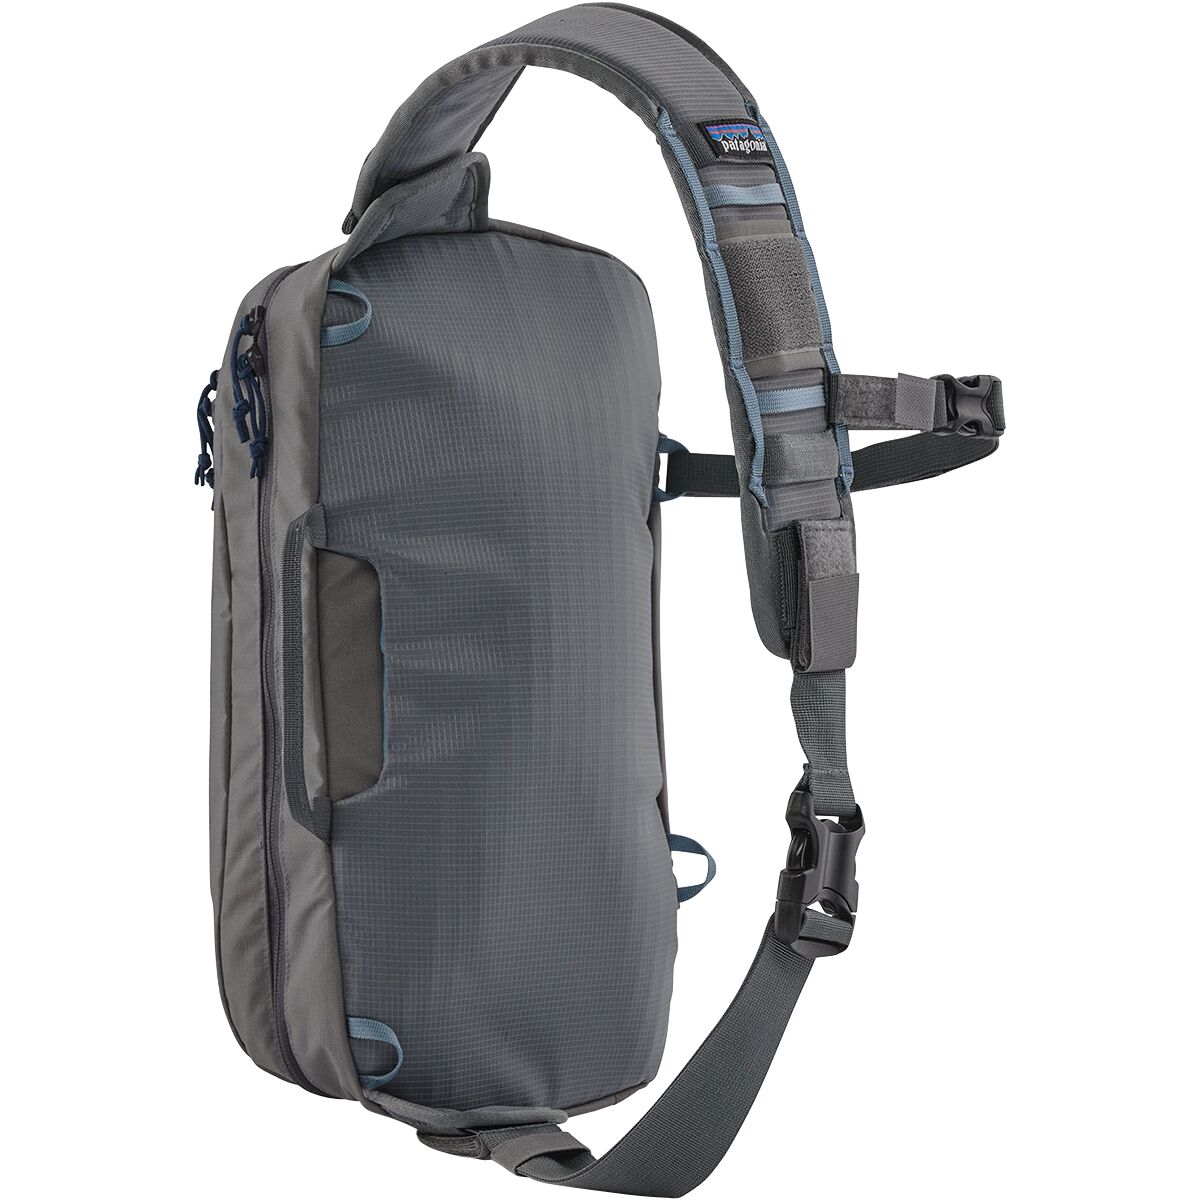 Patagonia Stealth 10L Sling Pack - Fly Fishing